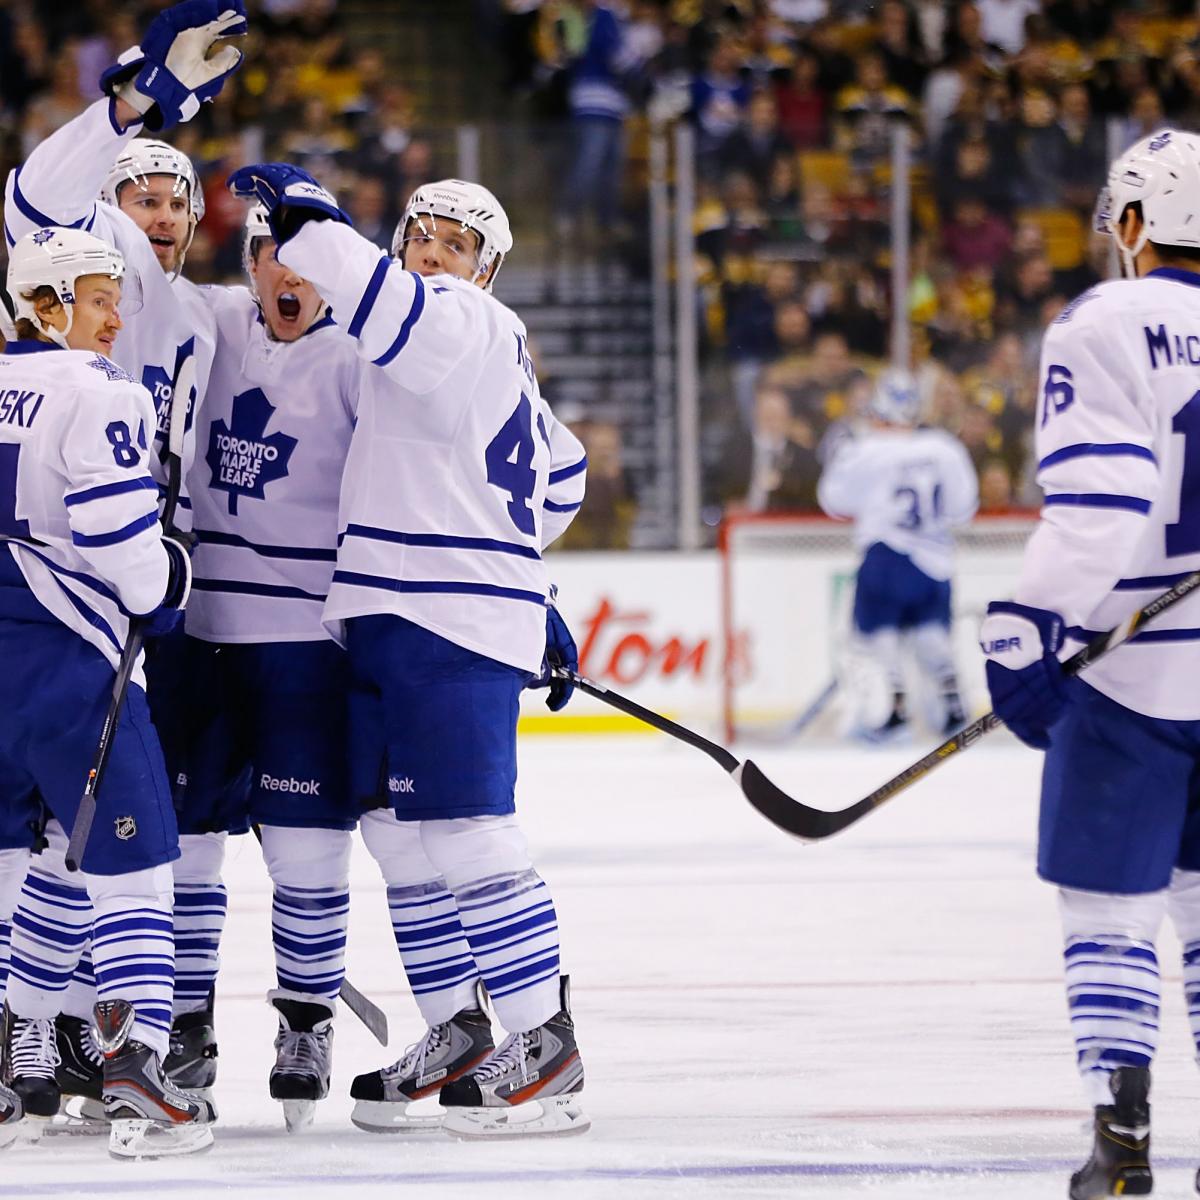 Toronto Maple Leafs Rumors All the Latest Buzz Ahead of 2013 NHL Draft